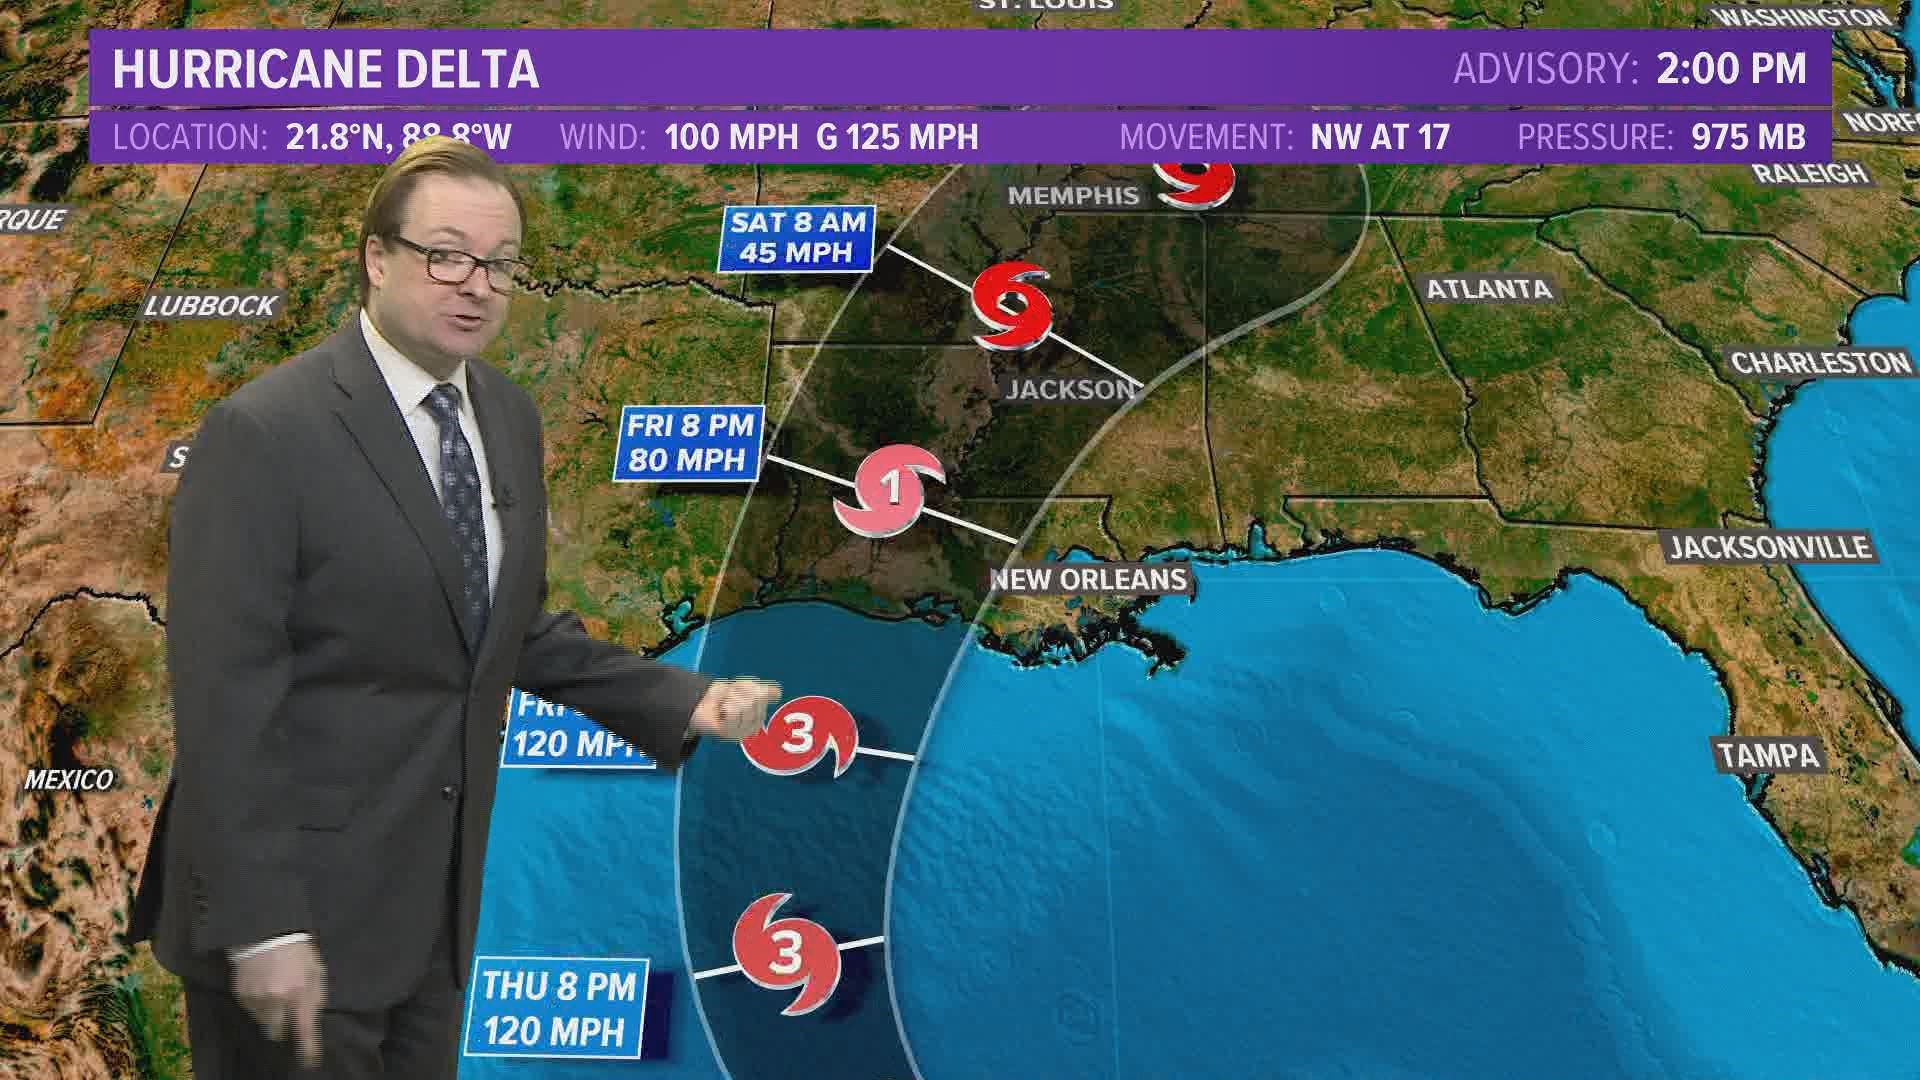 13News Now Meteorologist Evan Stewart has the latest on Hurricane Delta, which could hit the Louisiana coastline on Friday.